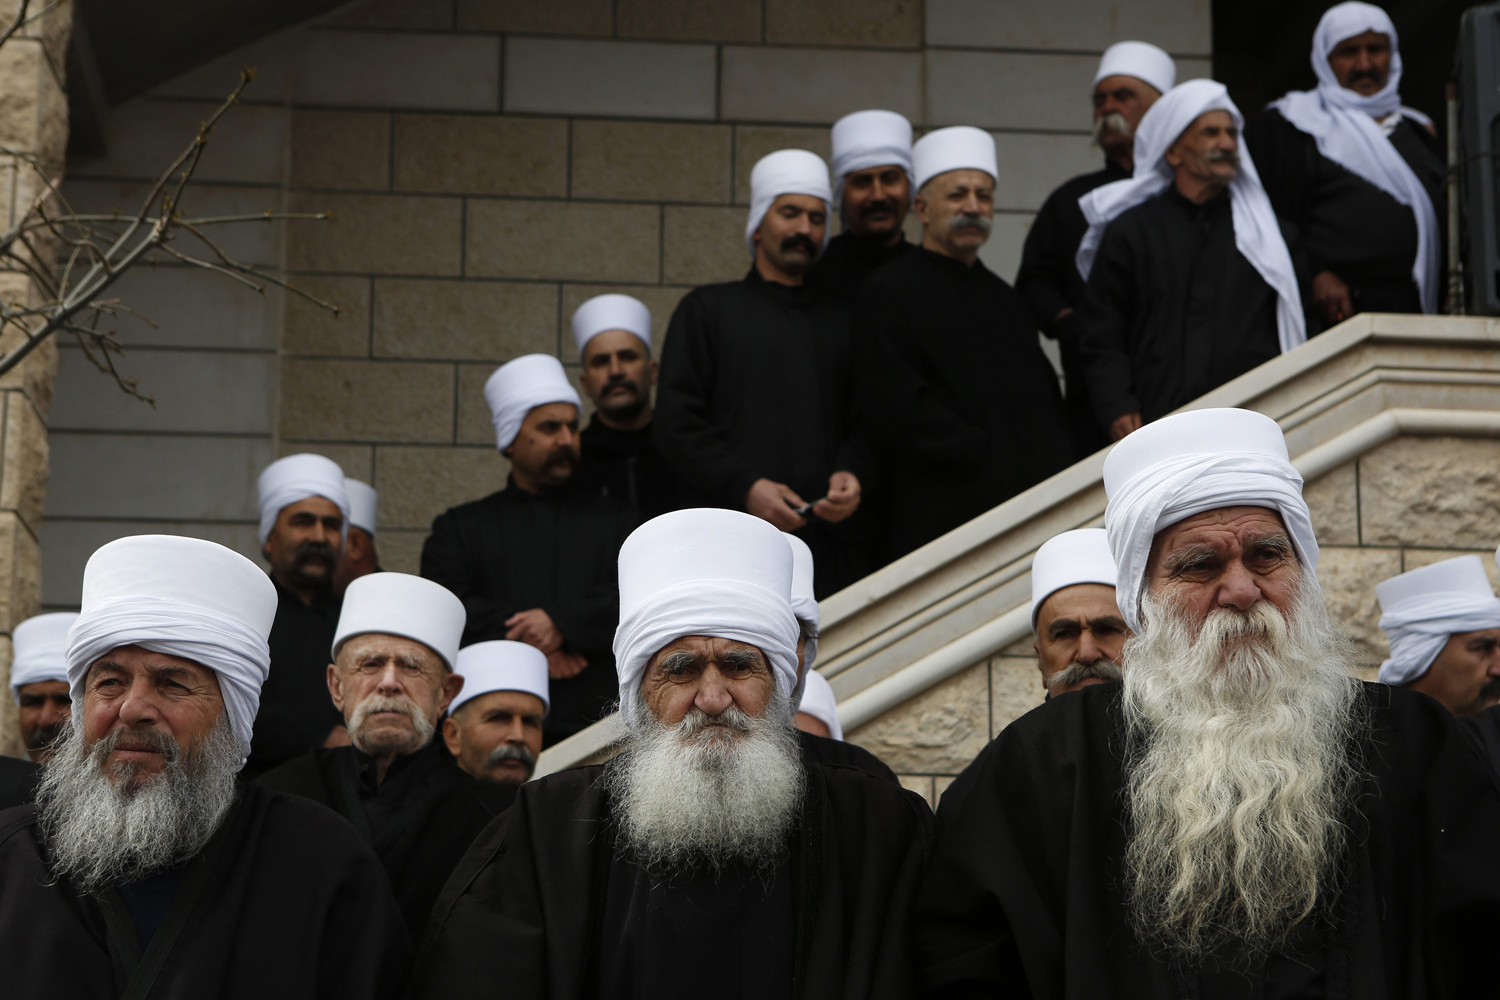 Members of the Druze community take part in a rally in the Druze village of Majdal Shams on the Golan Heights